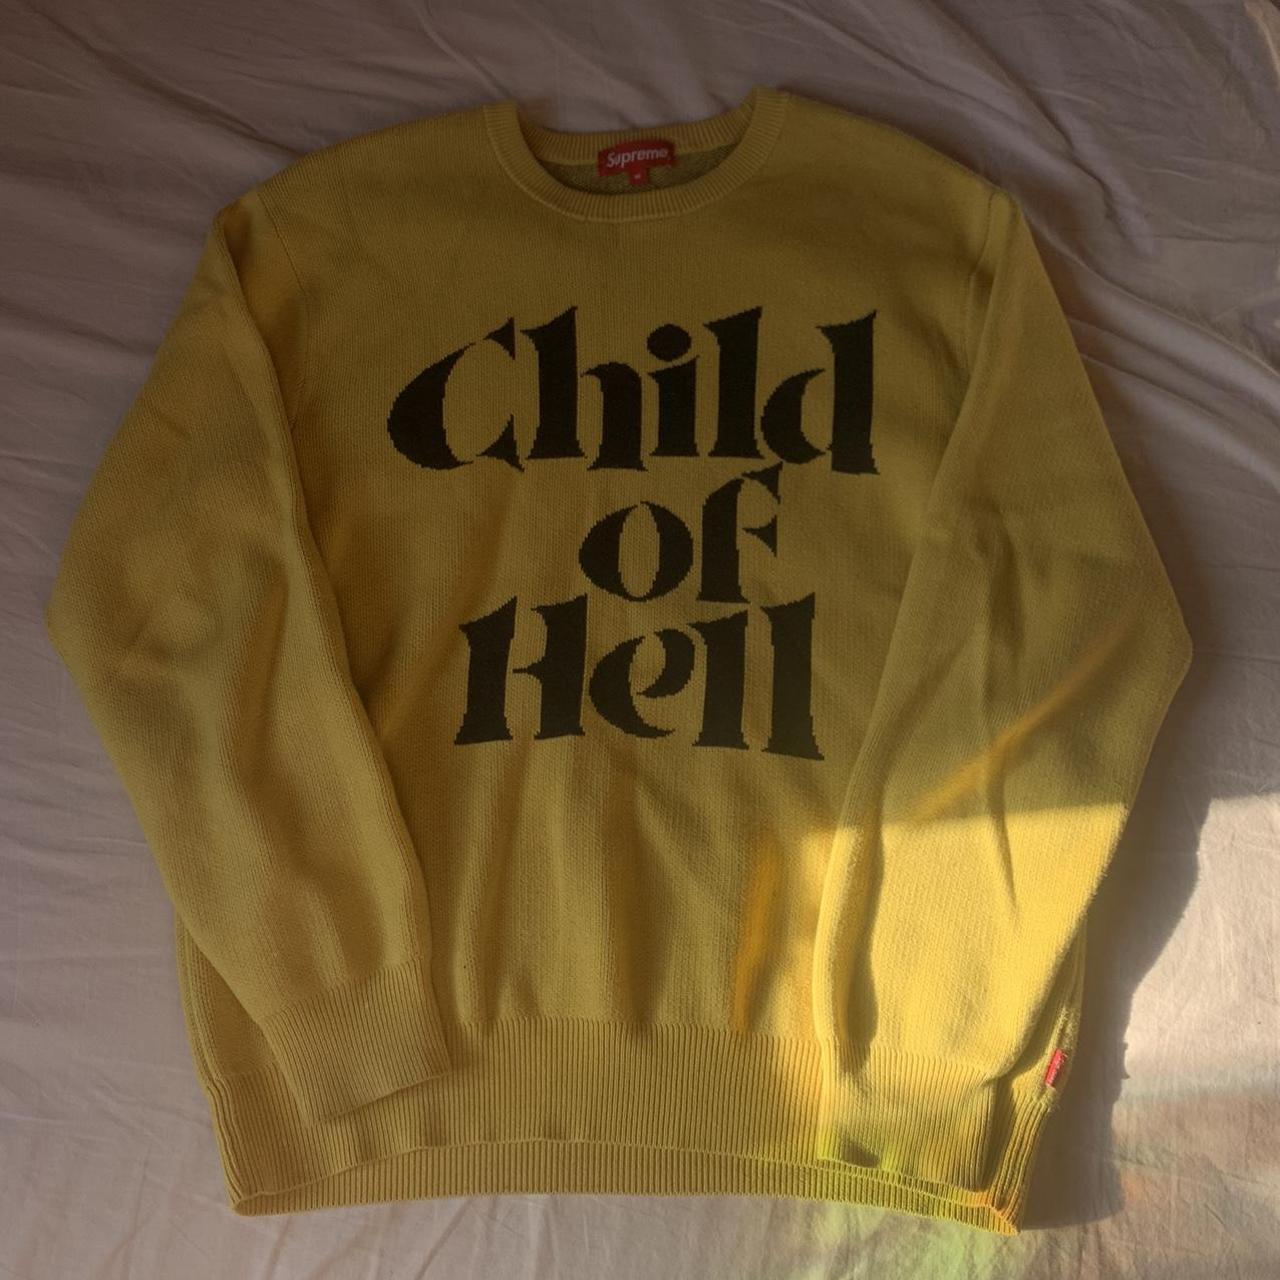 Supreme “child of hell” sweater, bought in... - Depop